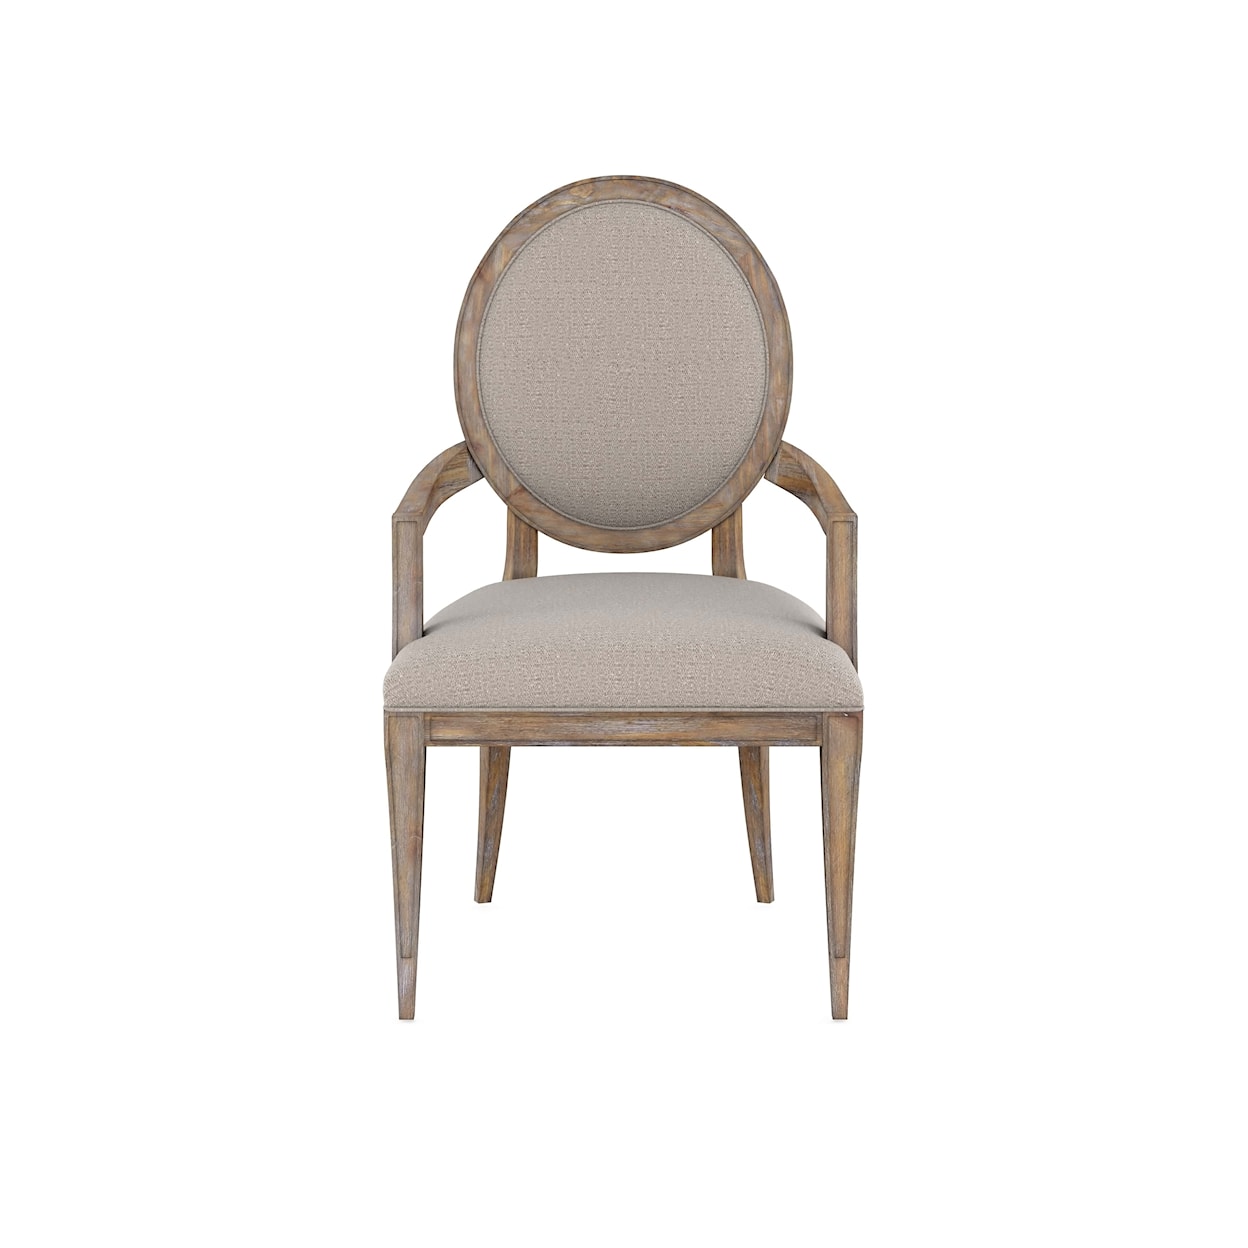 A.R.T. Furniture Inc Architrave Oval Arm Chair